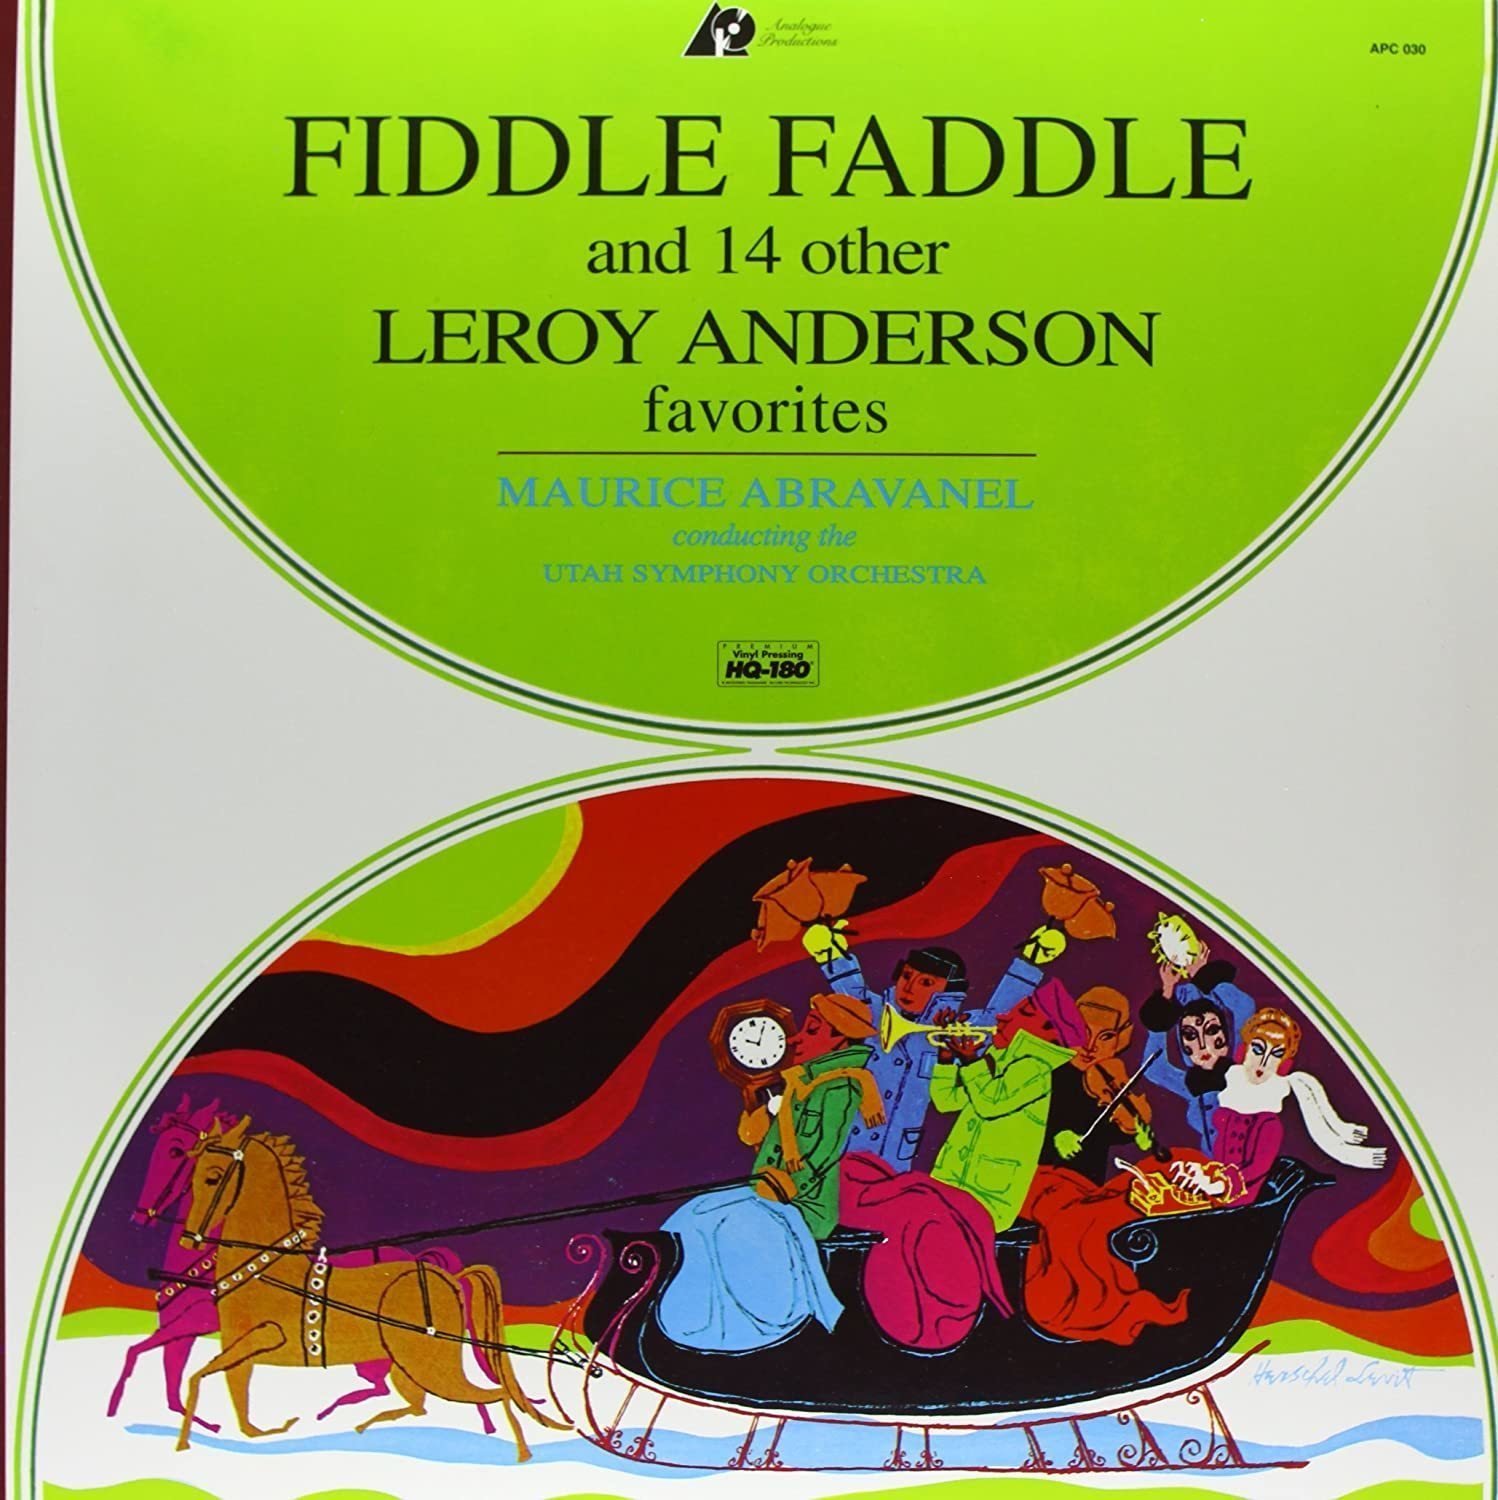 Vinyl Record Maurice Abravanel - Fiddle Faddle and 14 Other Leroy Anderson Favorites (LP)